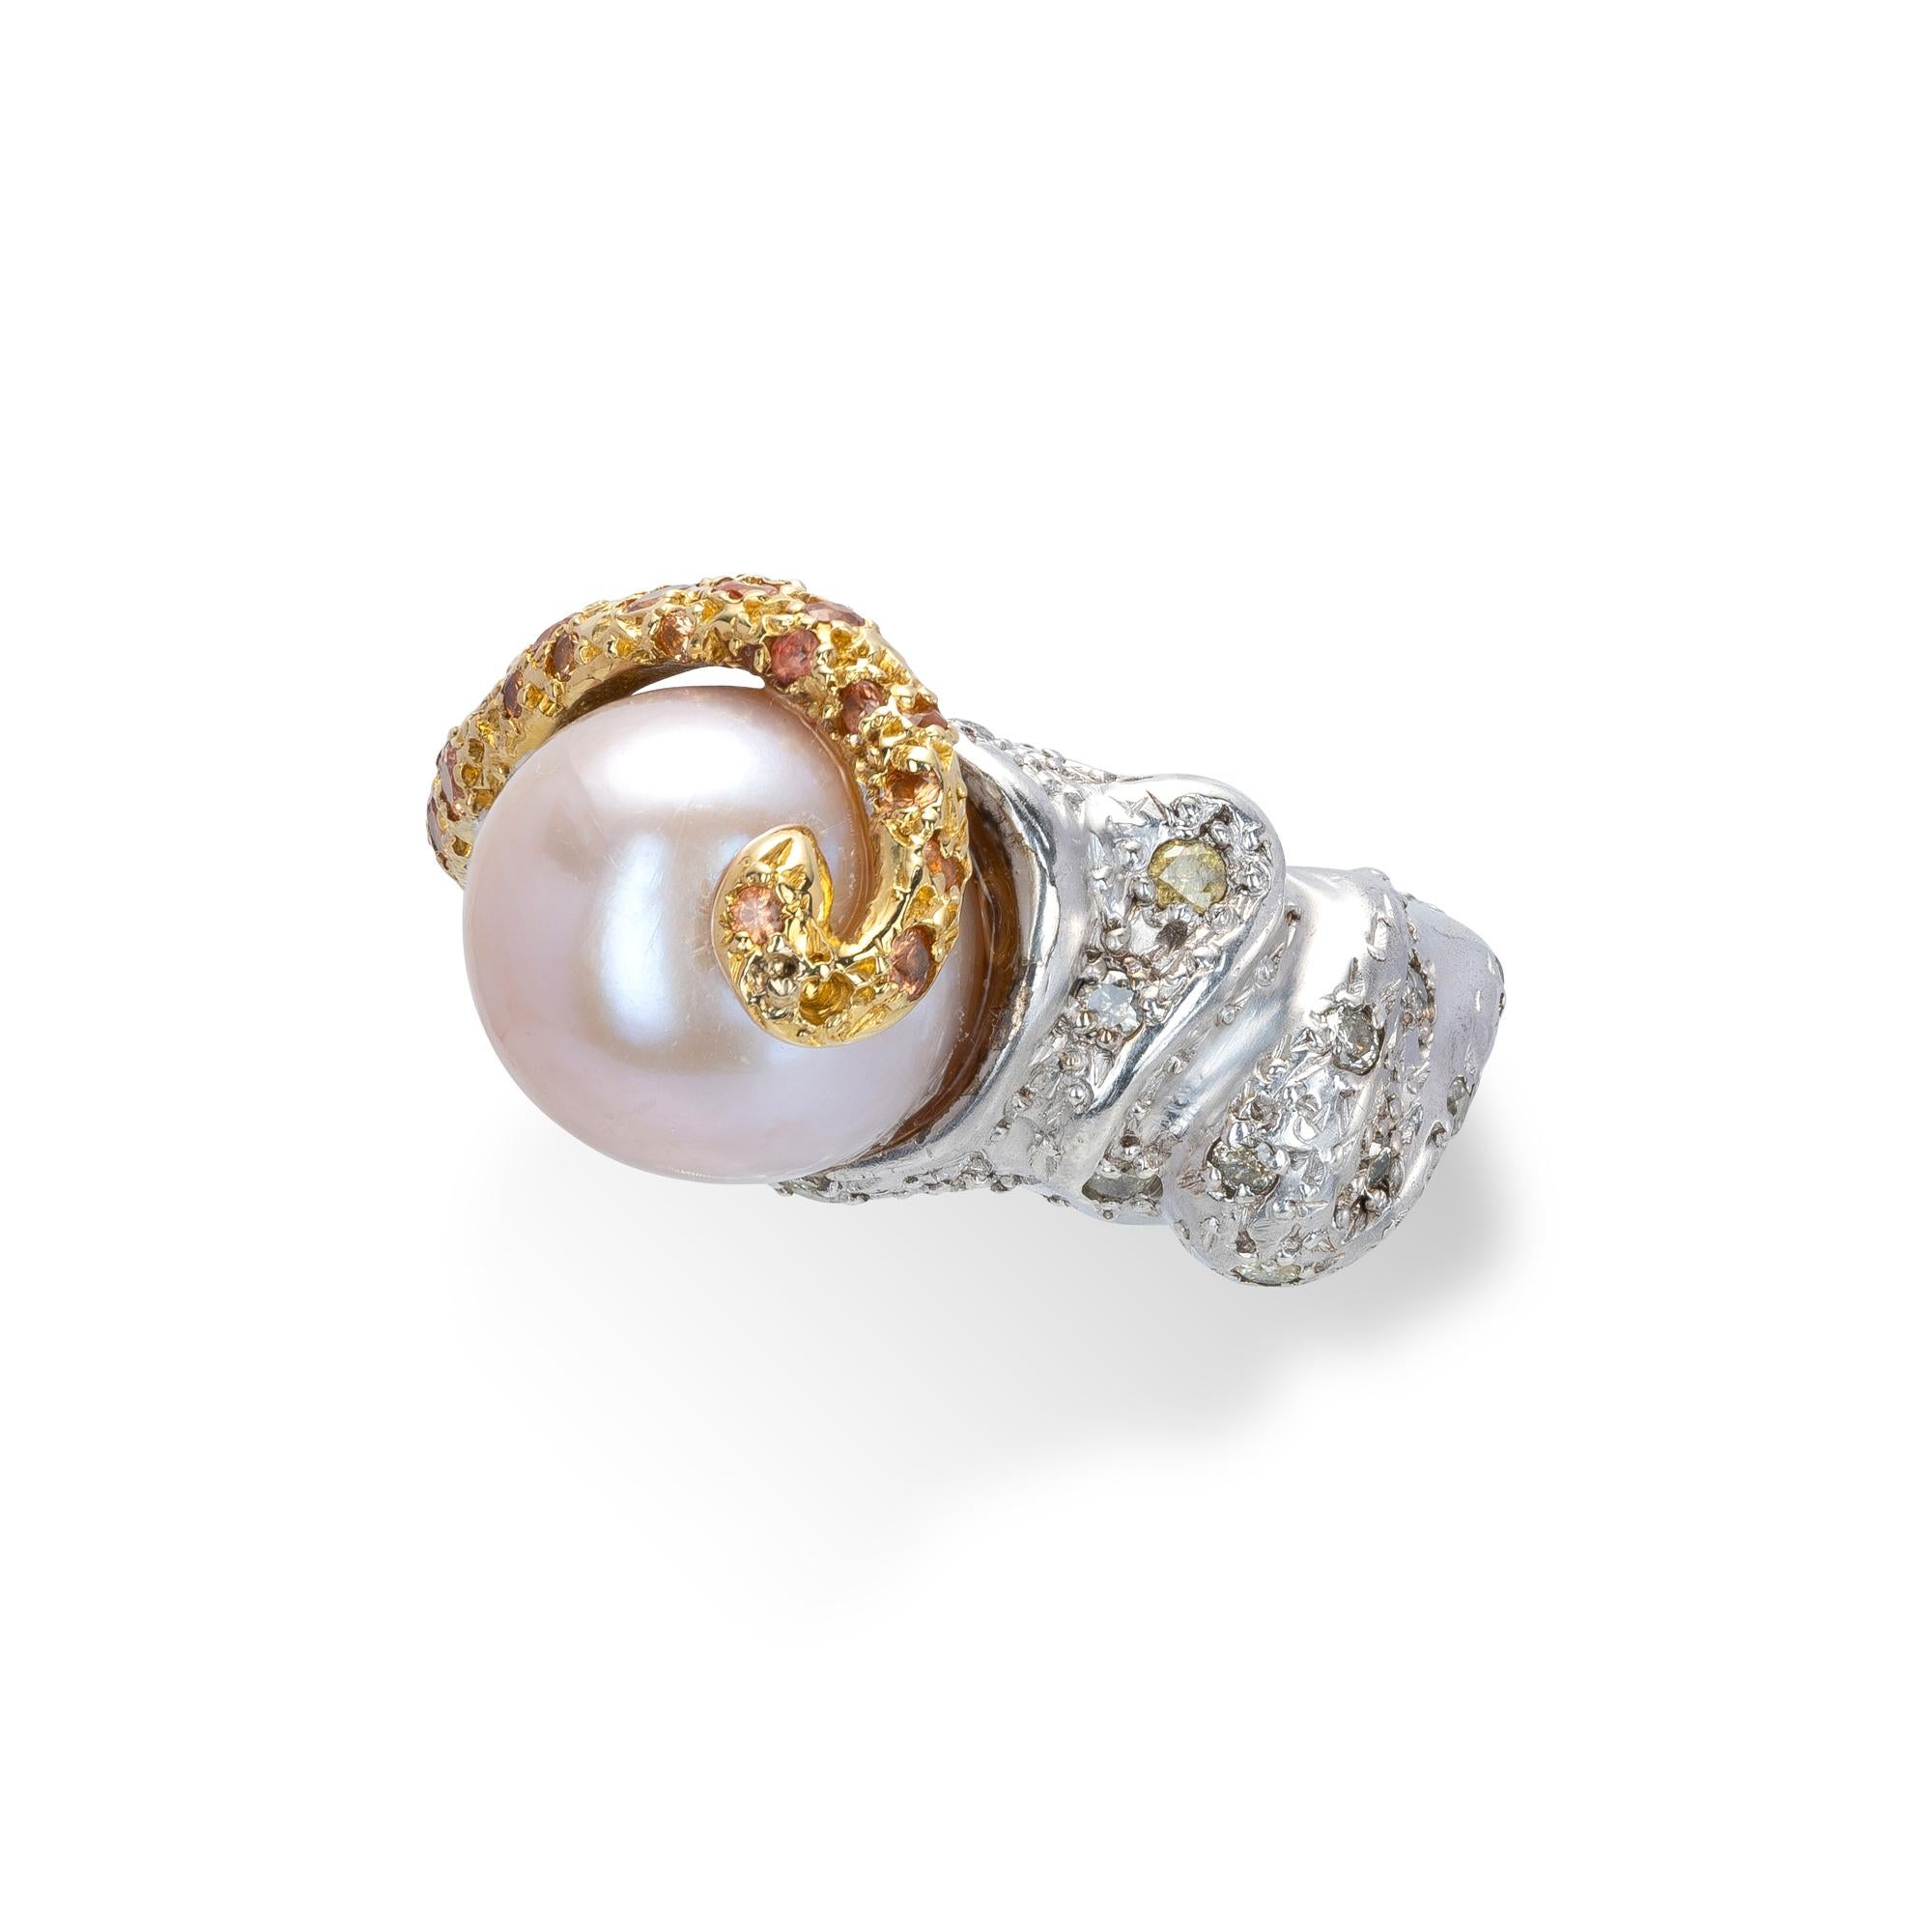 A Ring from d'Avossa Rêves d'Argent Collection in silver 925 ‰ and Yellow Gold Details. A Central Natural Pearl is enriched with a pavé of 0,80 cts Apricot Sapphires and  1,20 cts Ice Diamonds.

Ref. Number AAGP55